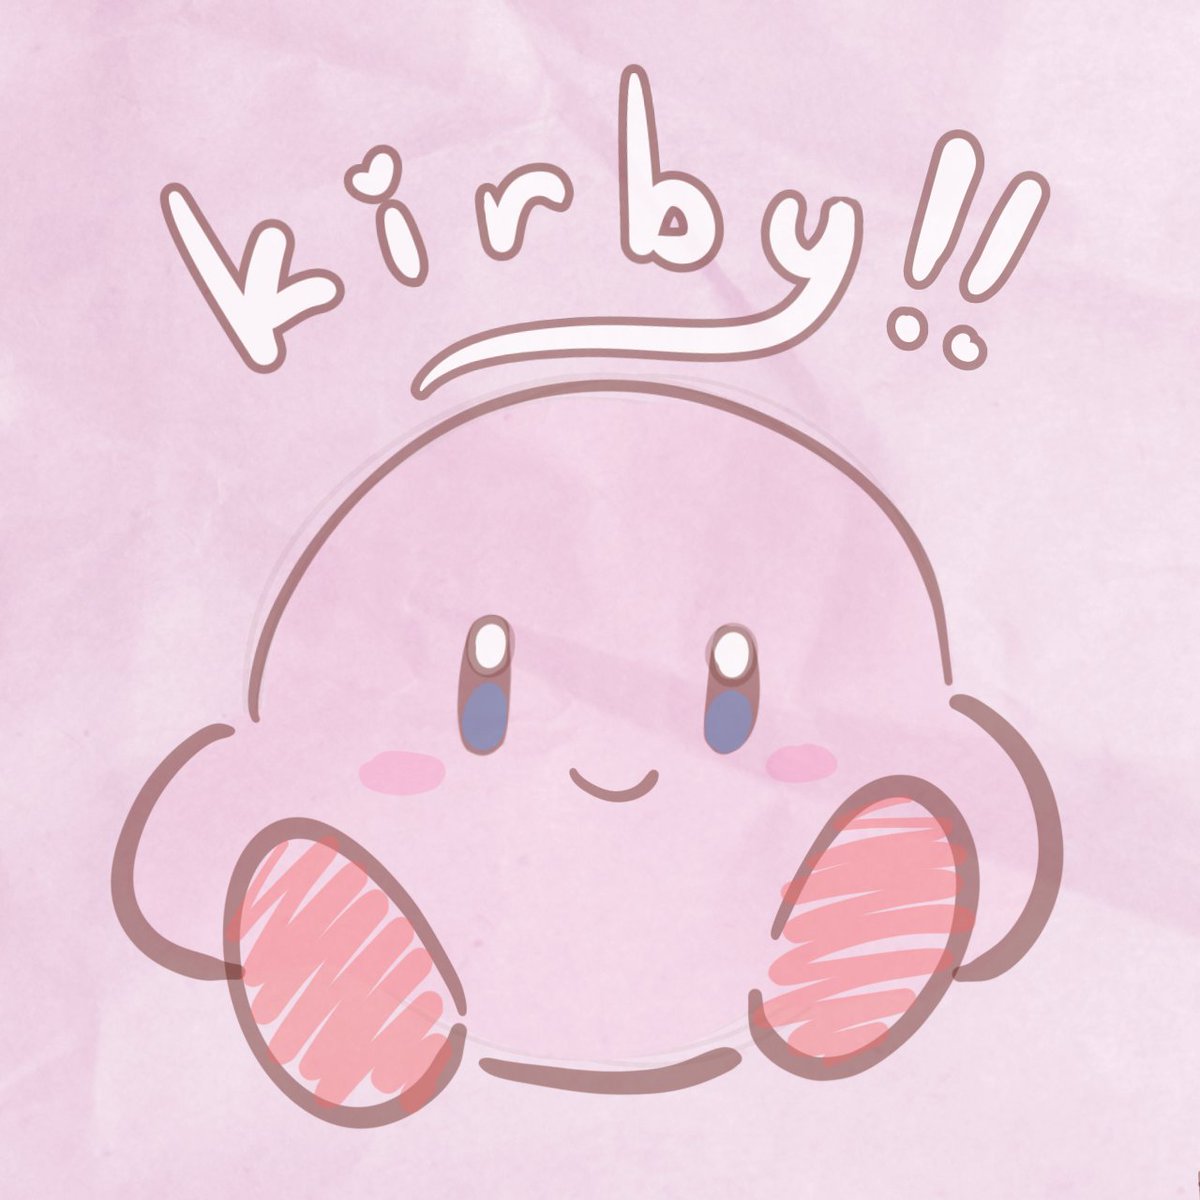 Decided to doodle Kirby everyday cause why not :3